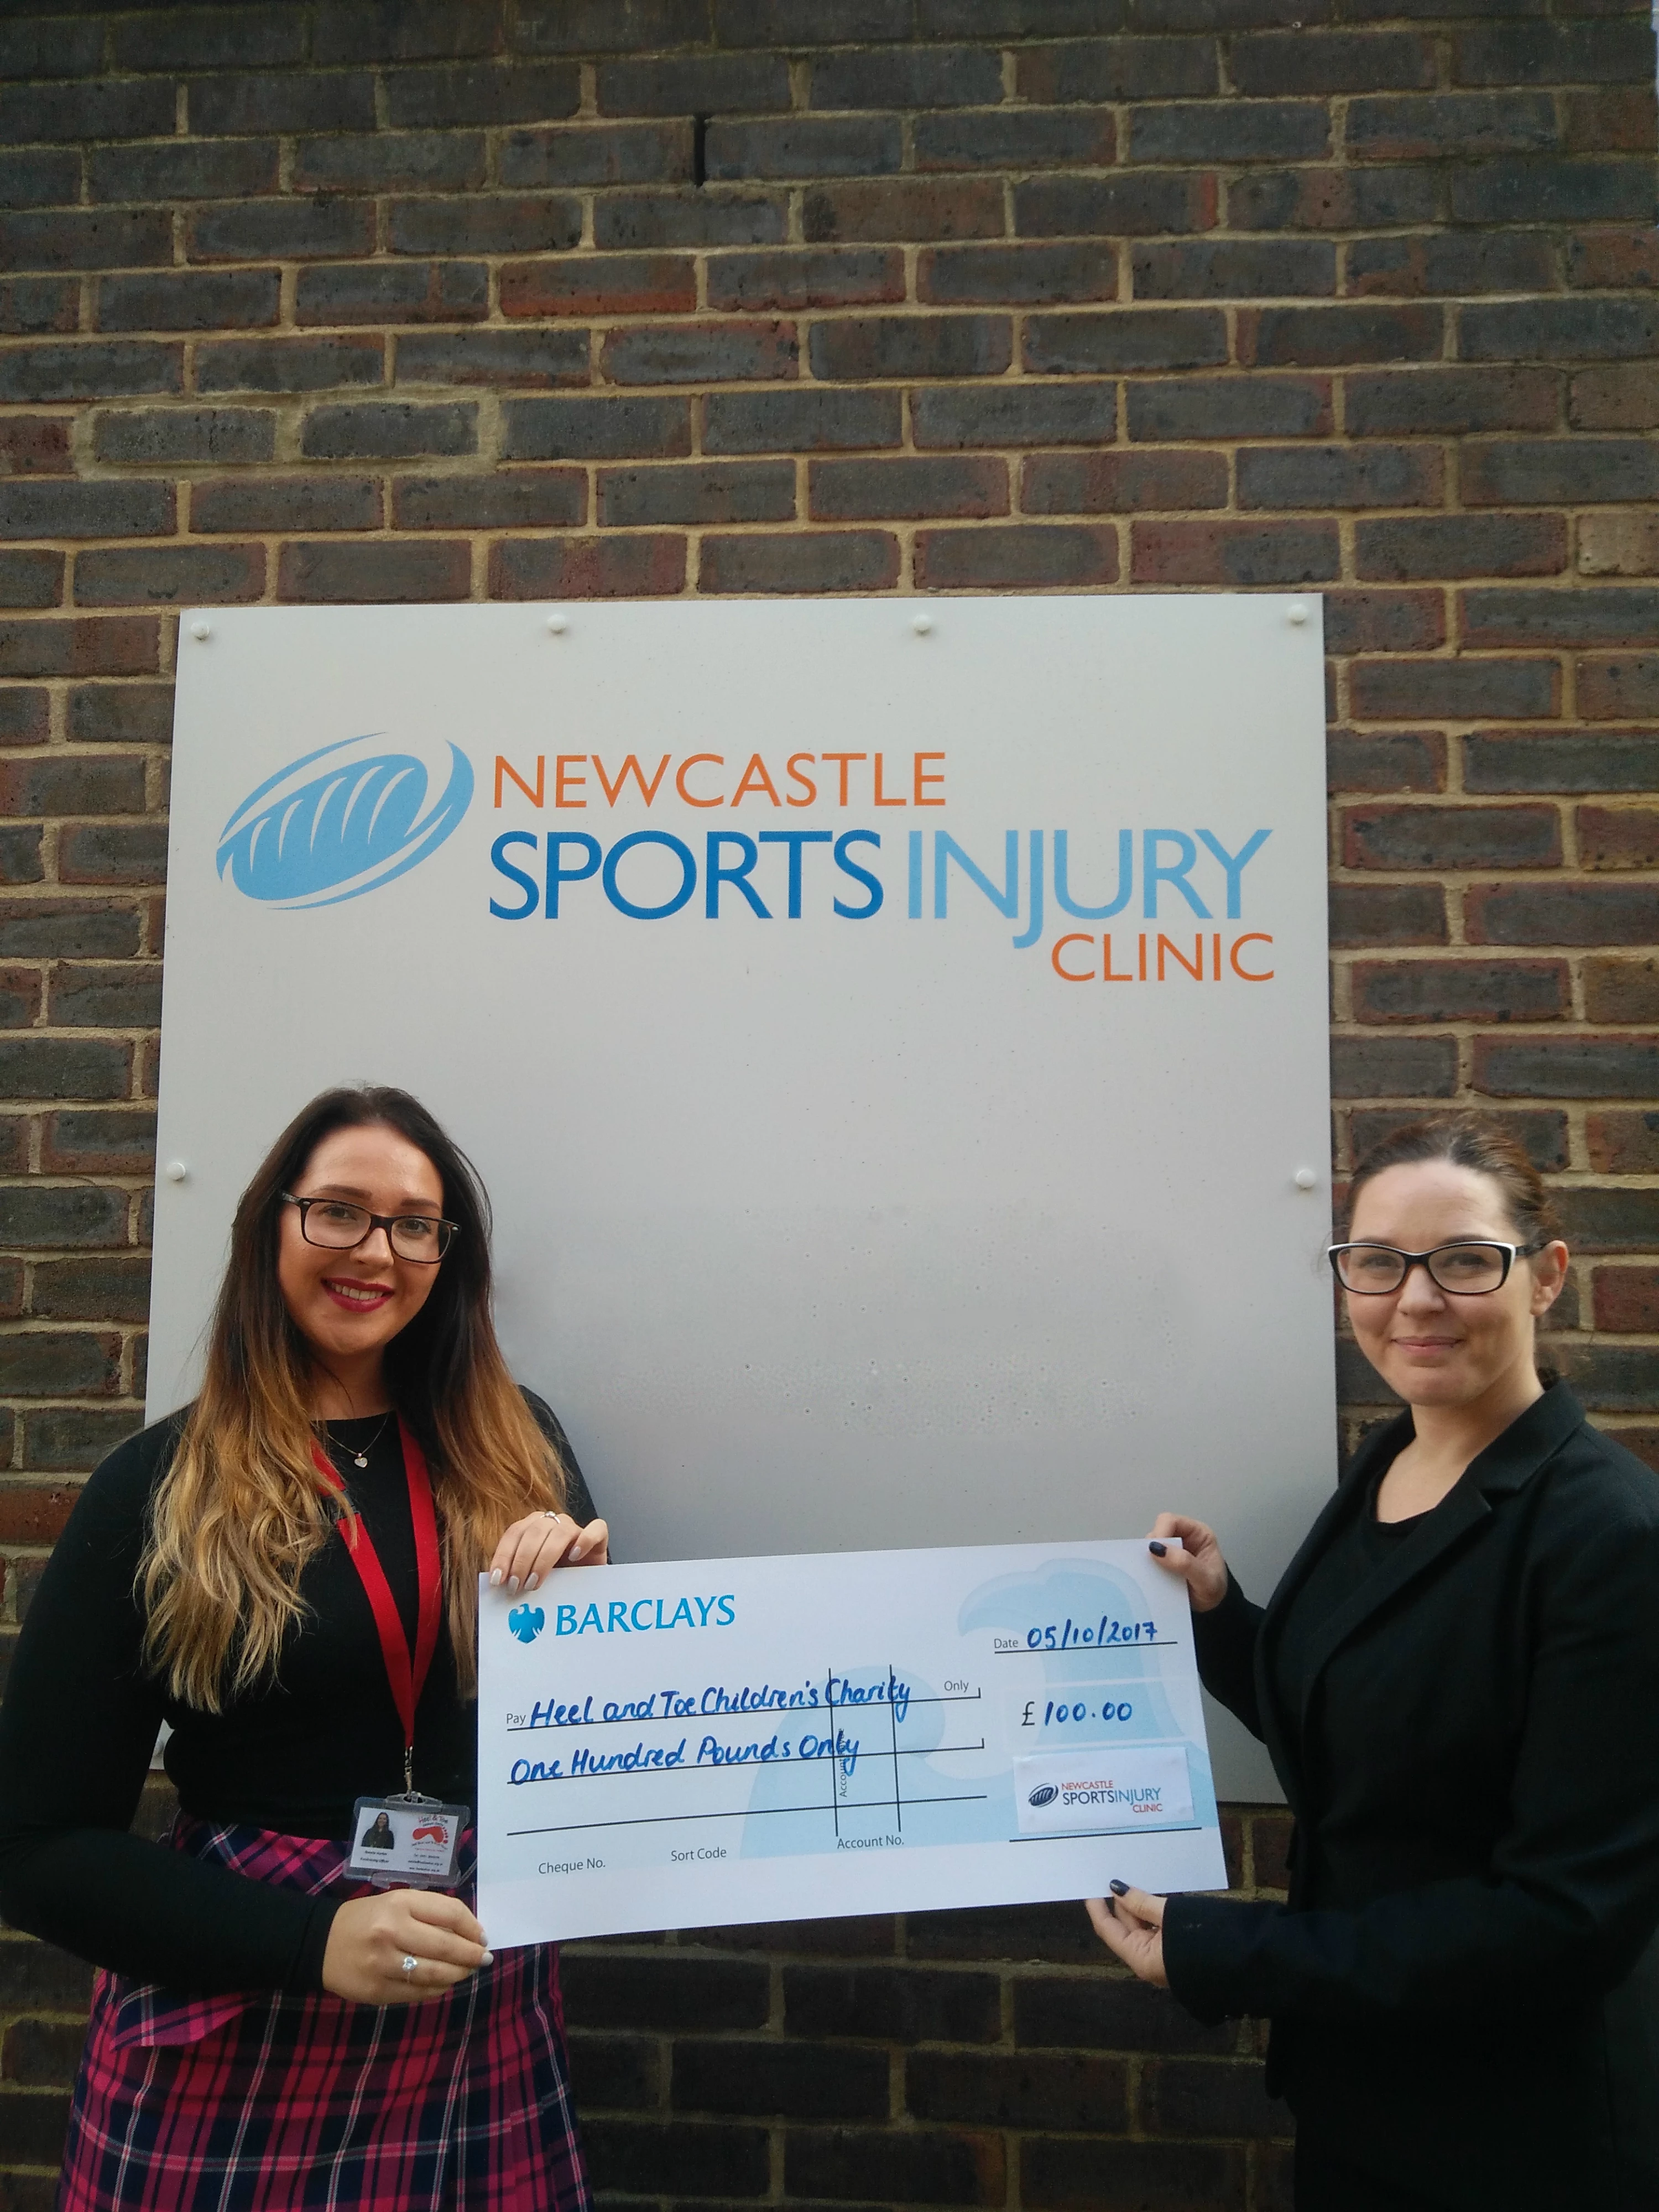 Natalie Harker, left, from Heel and Toe Children's Charity, collects the charity cheque from Emma Vinton, Newcastle Sports Injury Clinic